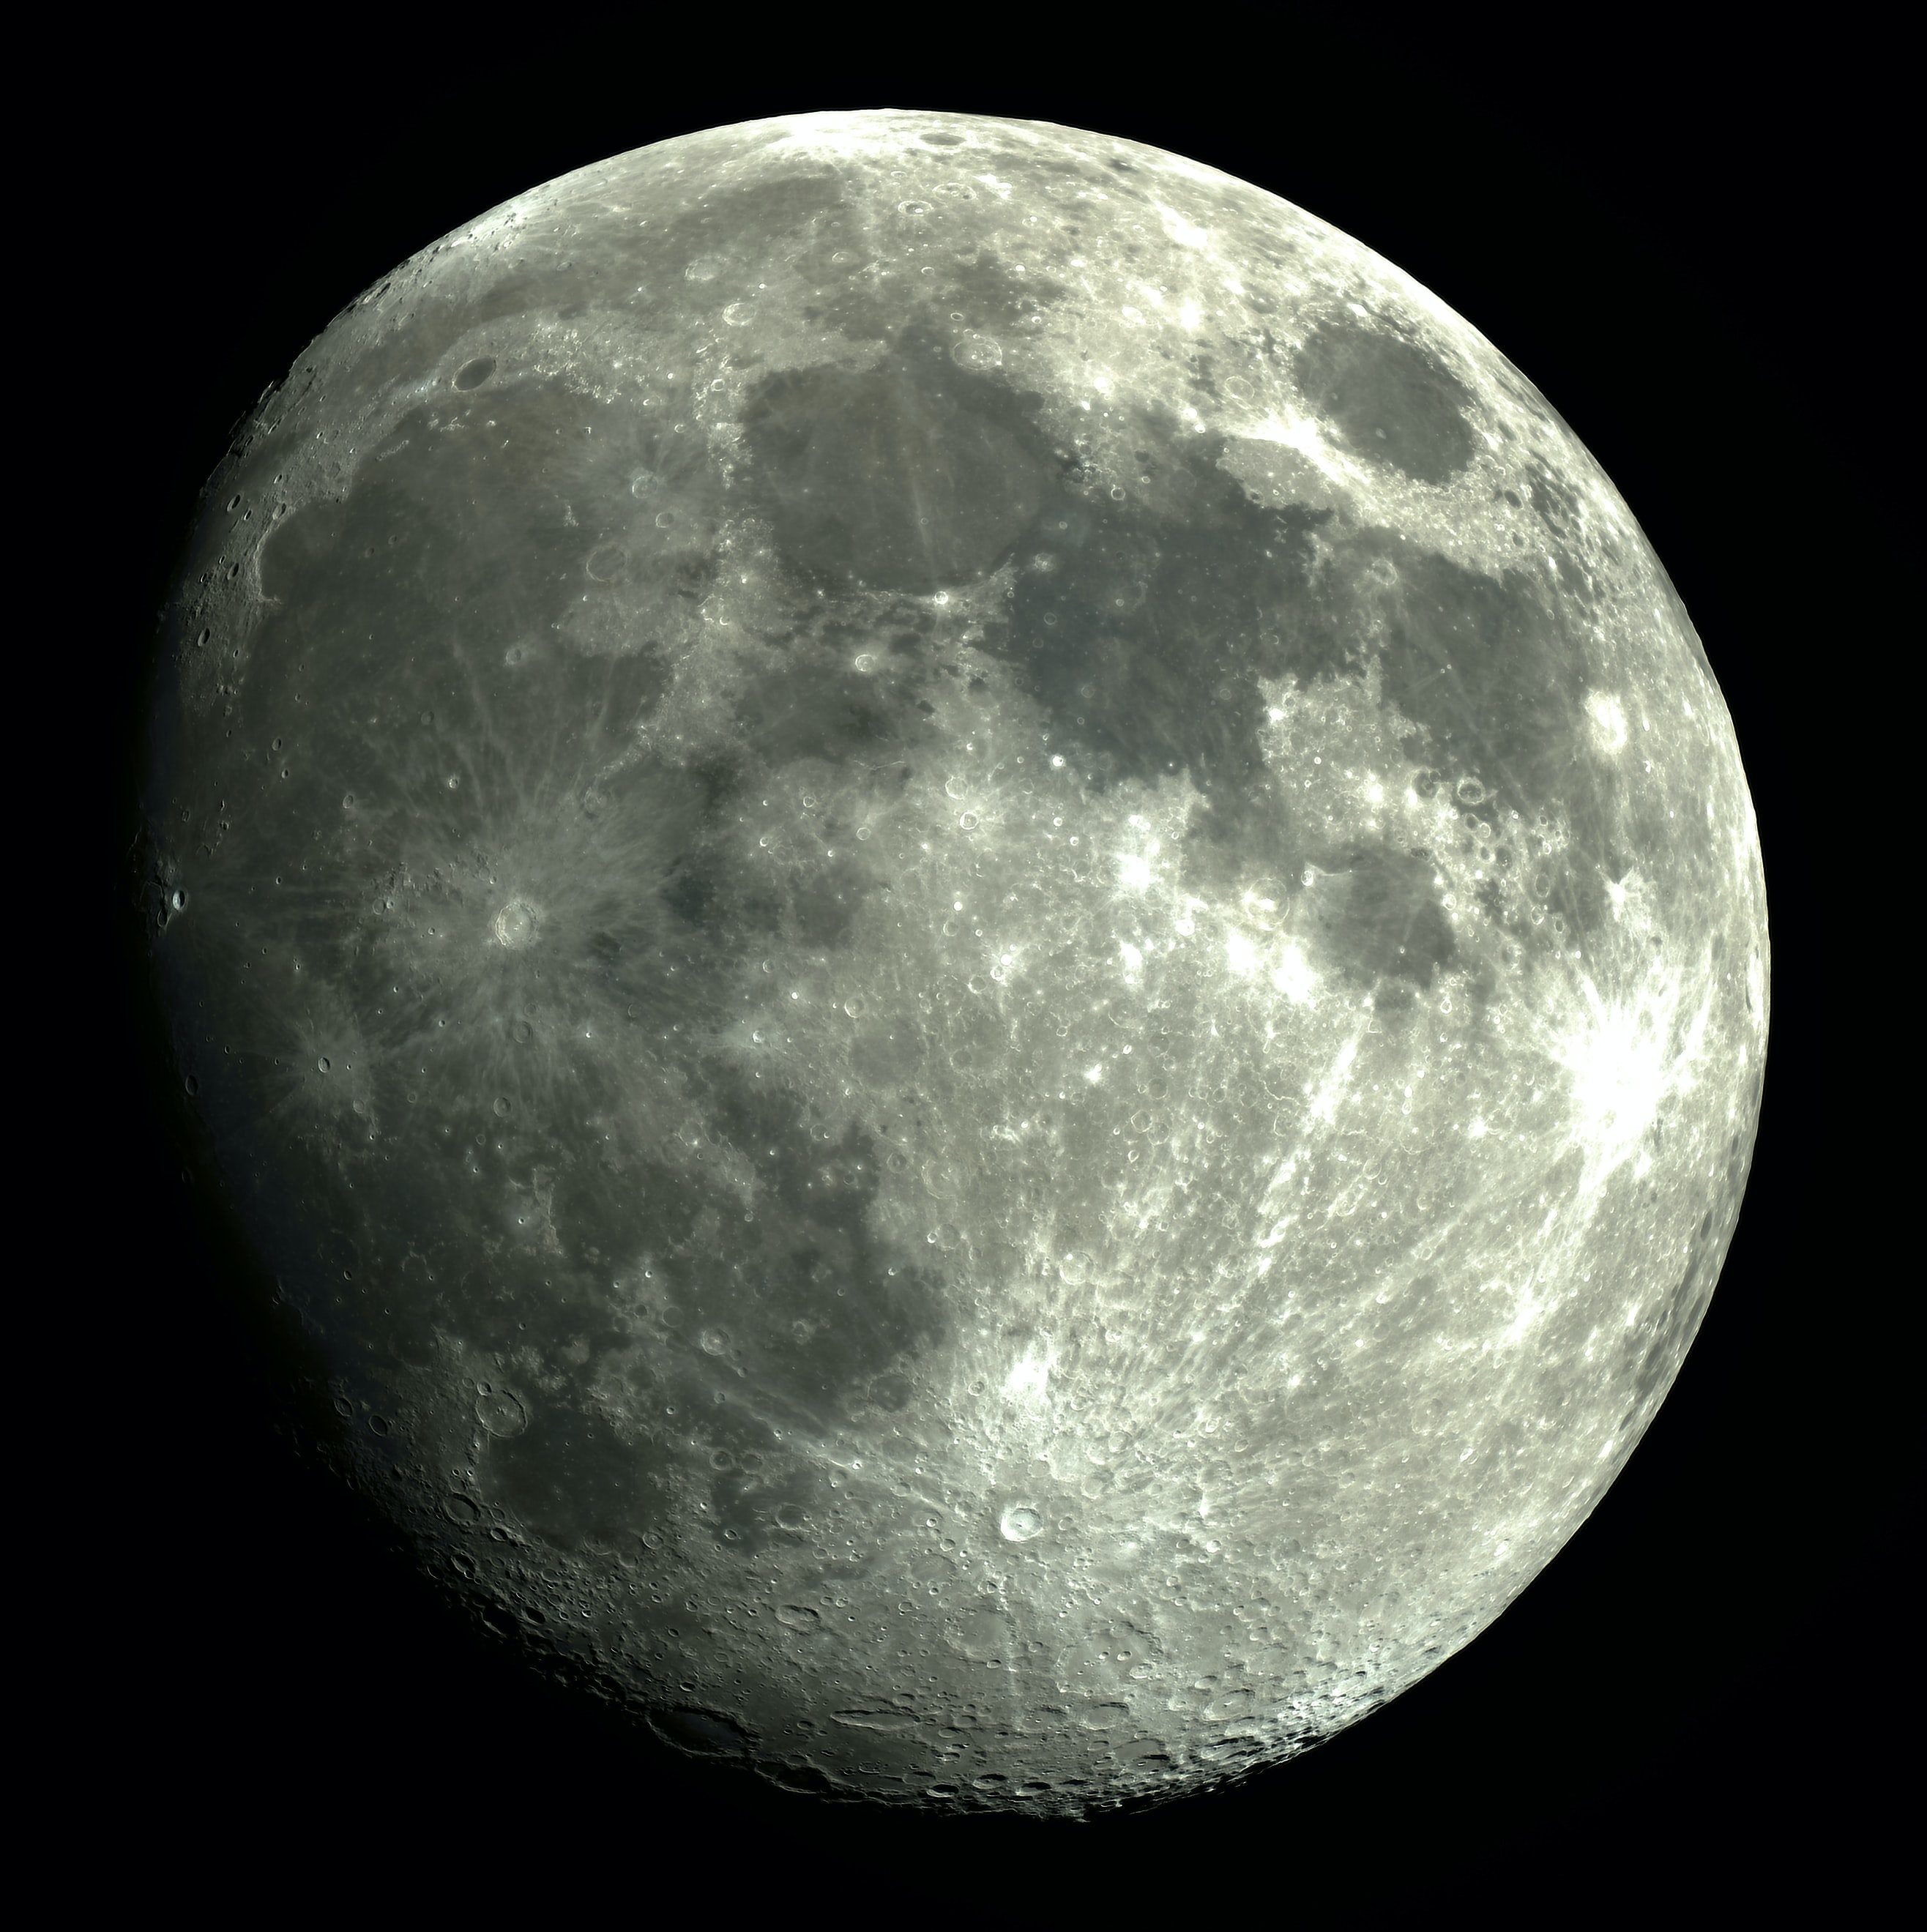 Photograph of the moon.